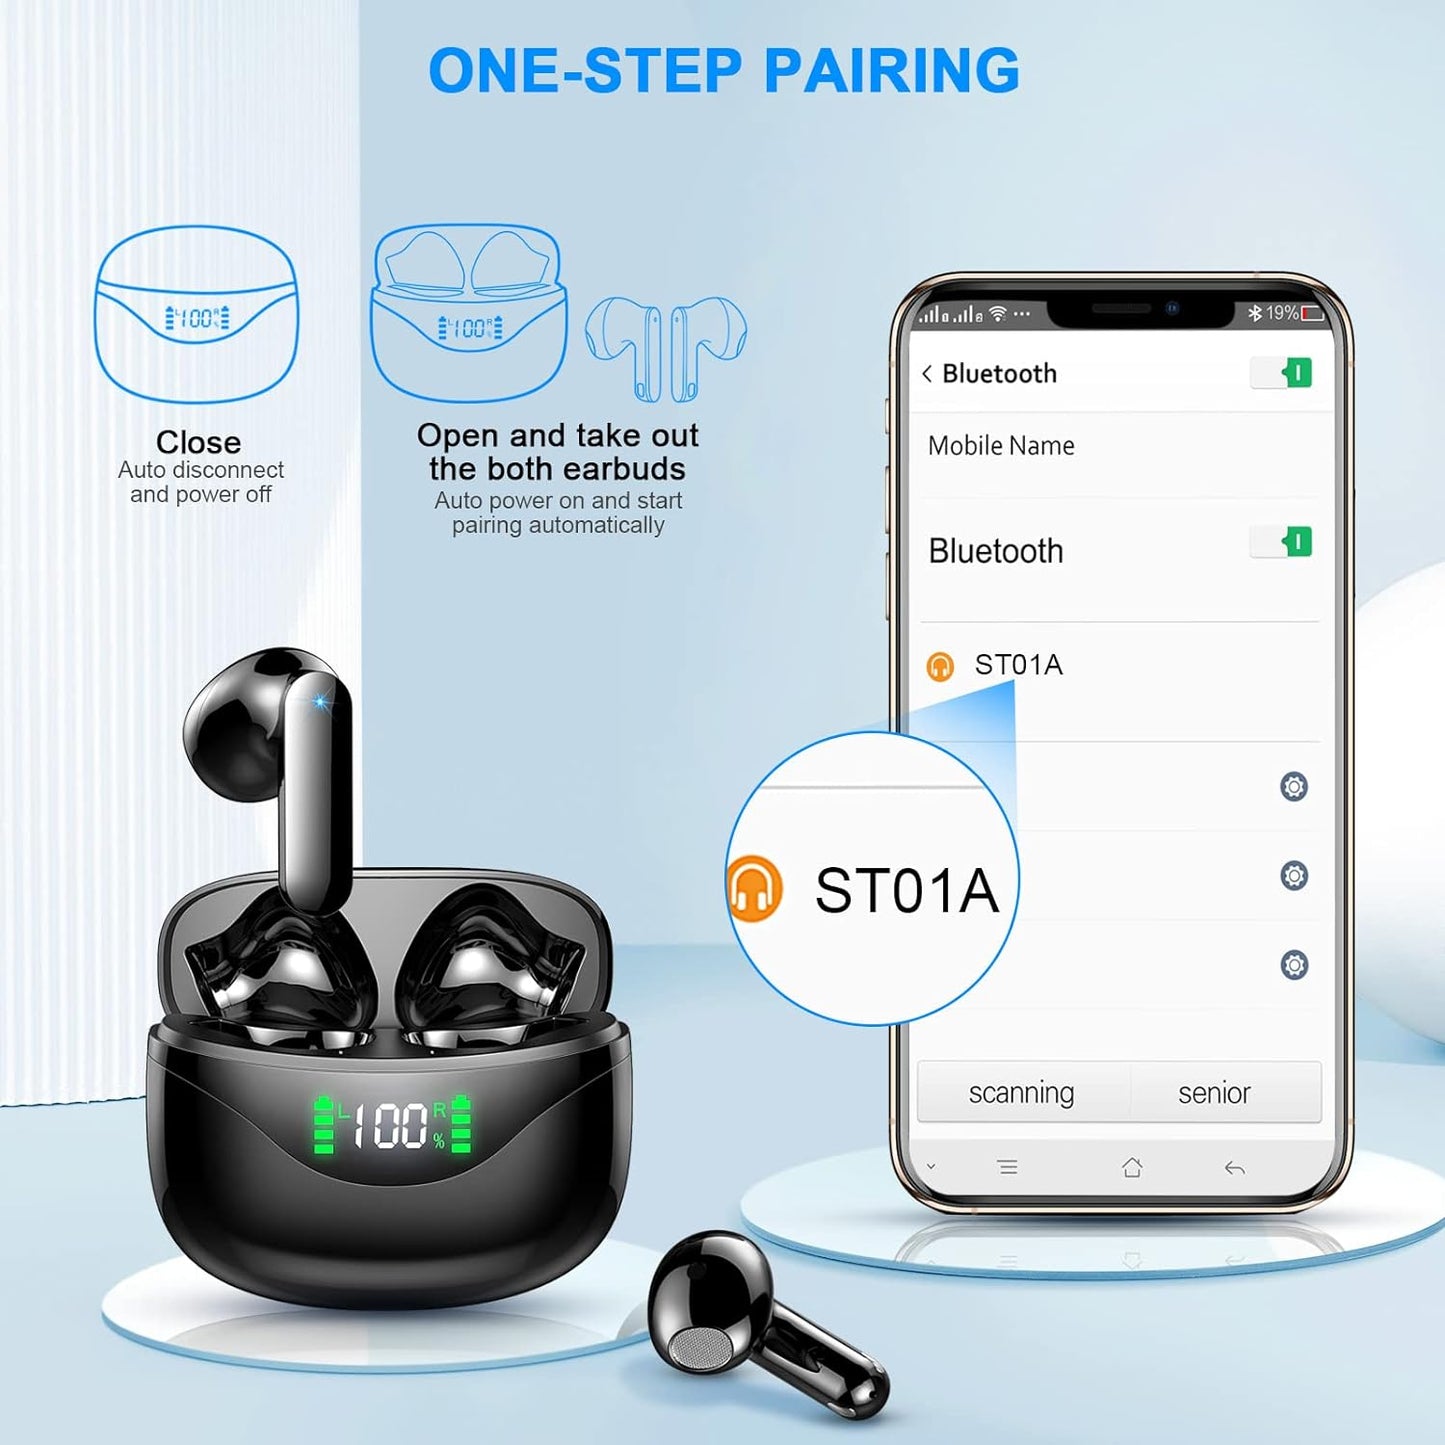 Wireless Earbuds, Bluetooth 5.3 Headphones Stereo Bass Bluetooth Earbuds Built in Noise Cancelling Mic 36H Playtime Wireless Earphones with Mini Charging Case IP7 Waterproof Ear Buds for Android iOS